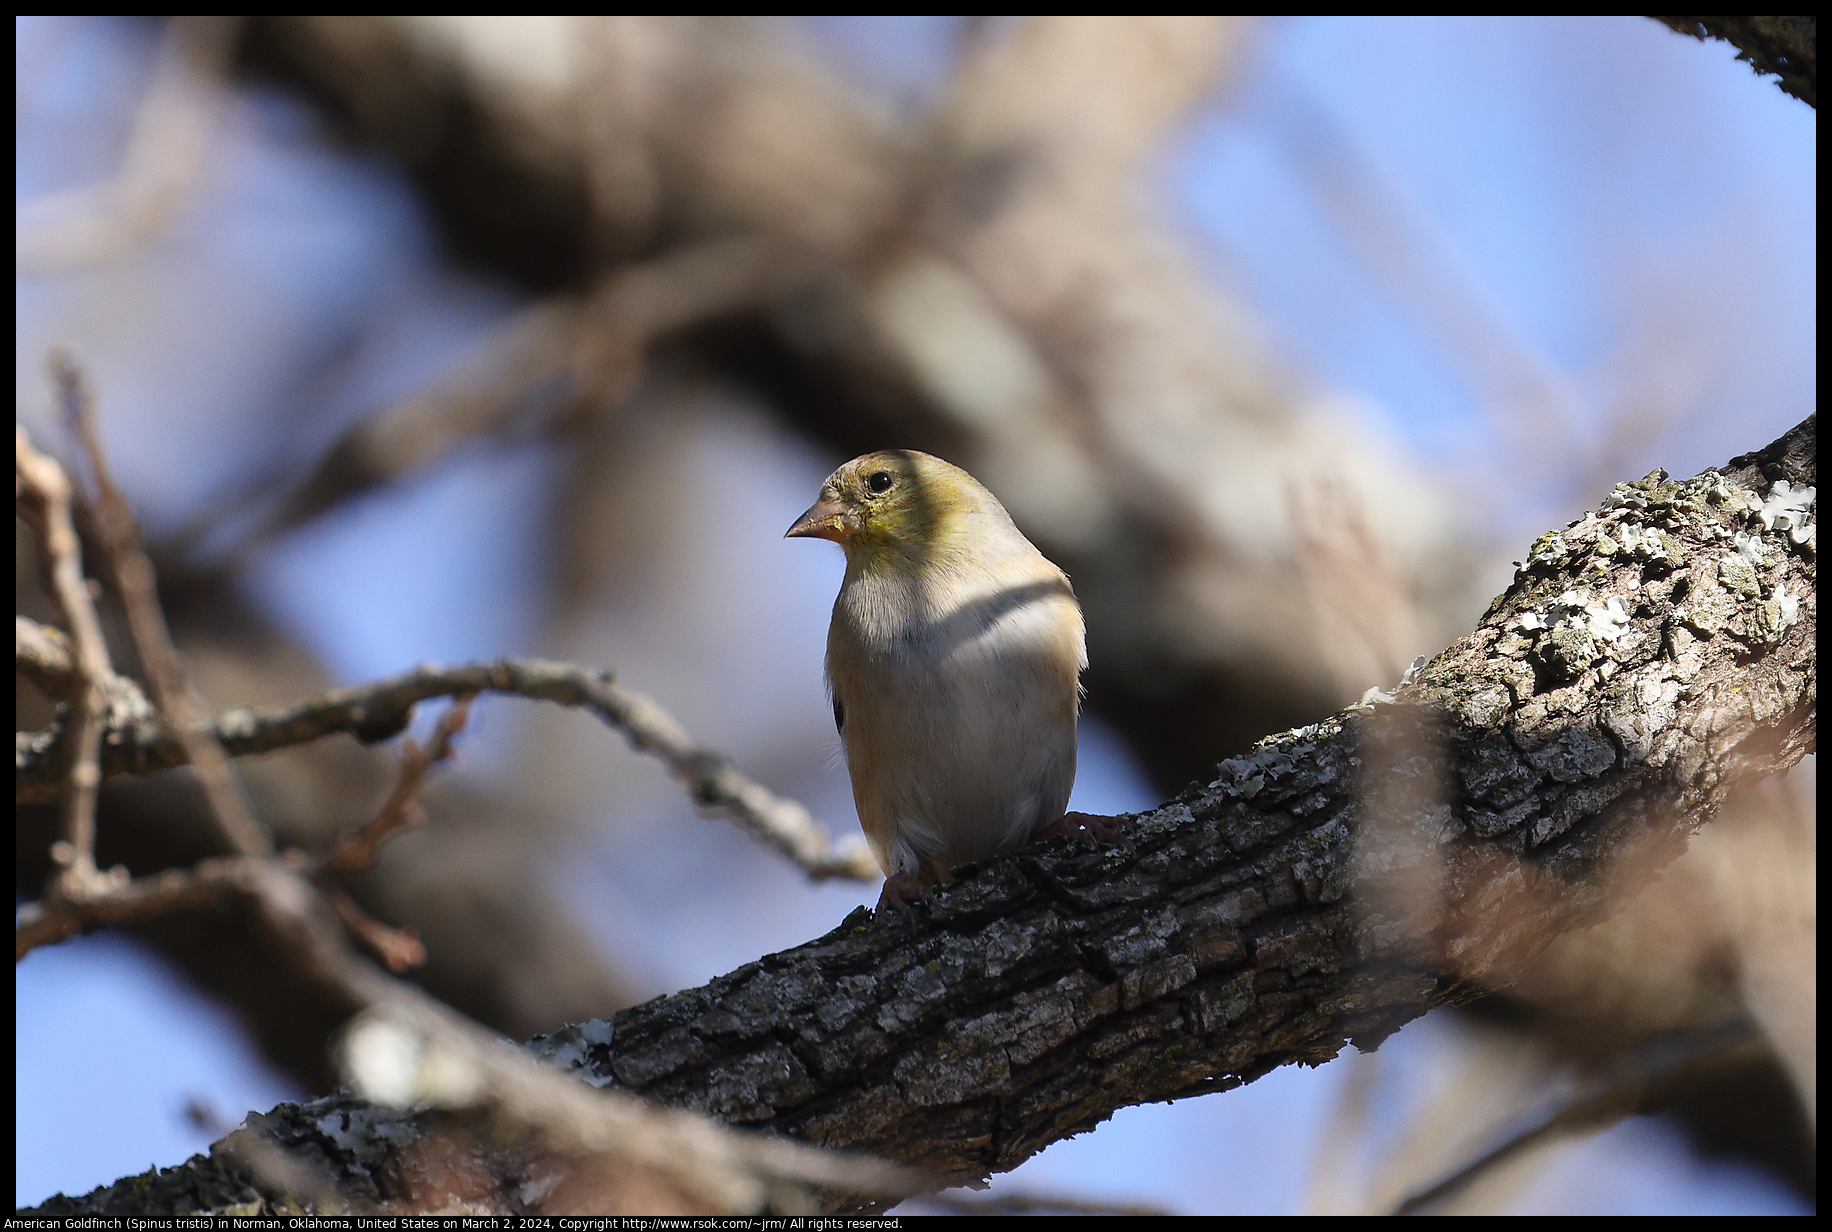 American Goldfinch (Spinus tristis) in Norman, Oklahoma, United States on March 2, 2024